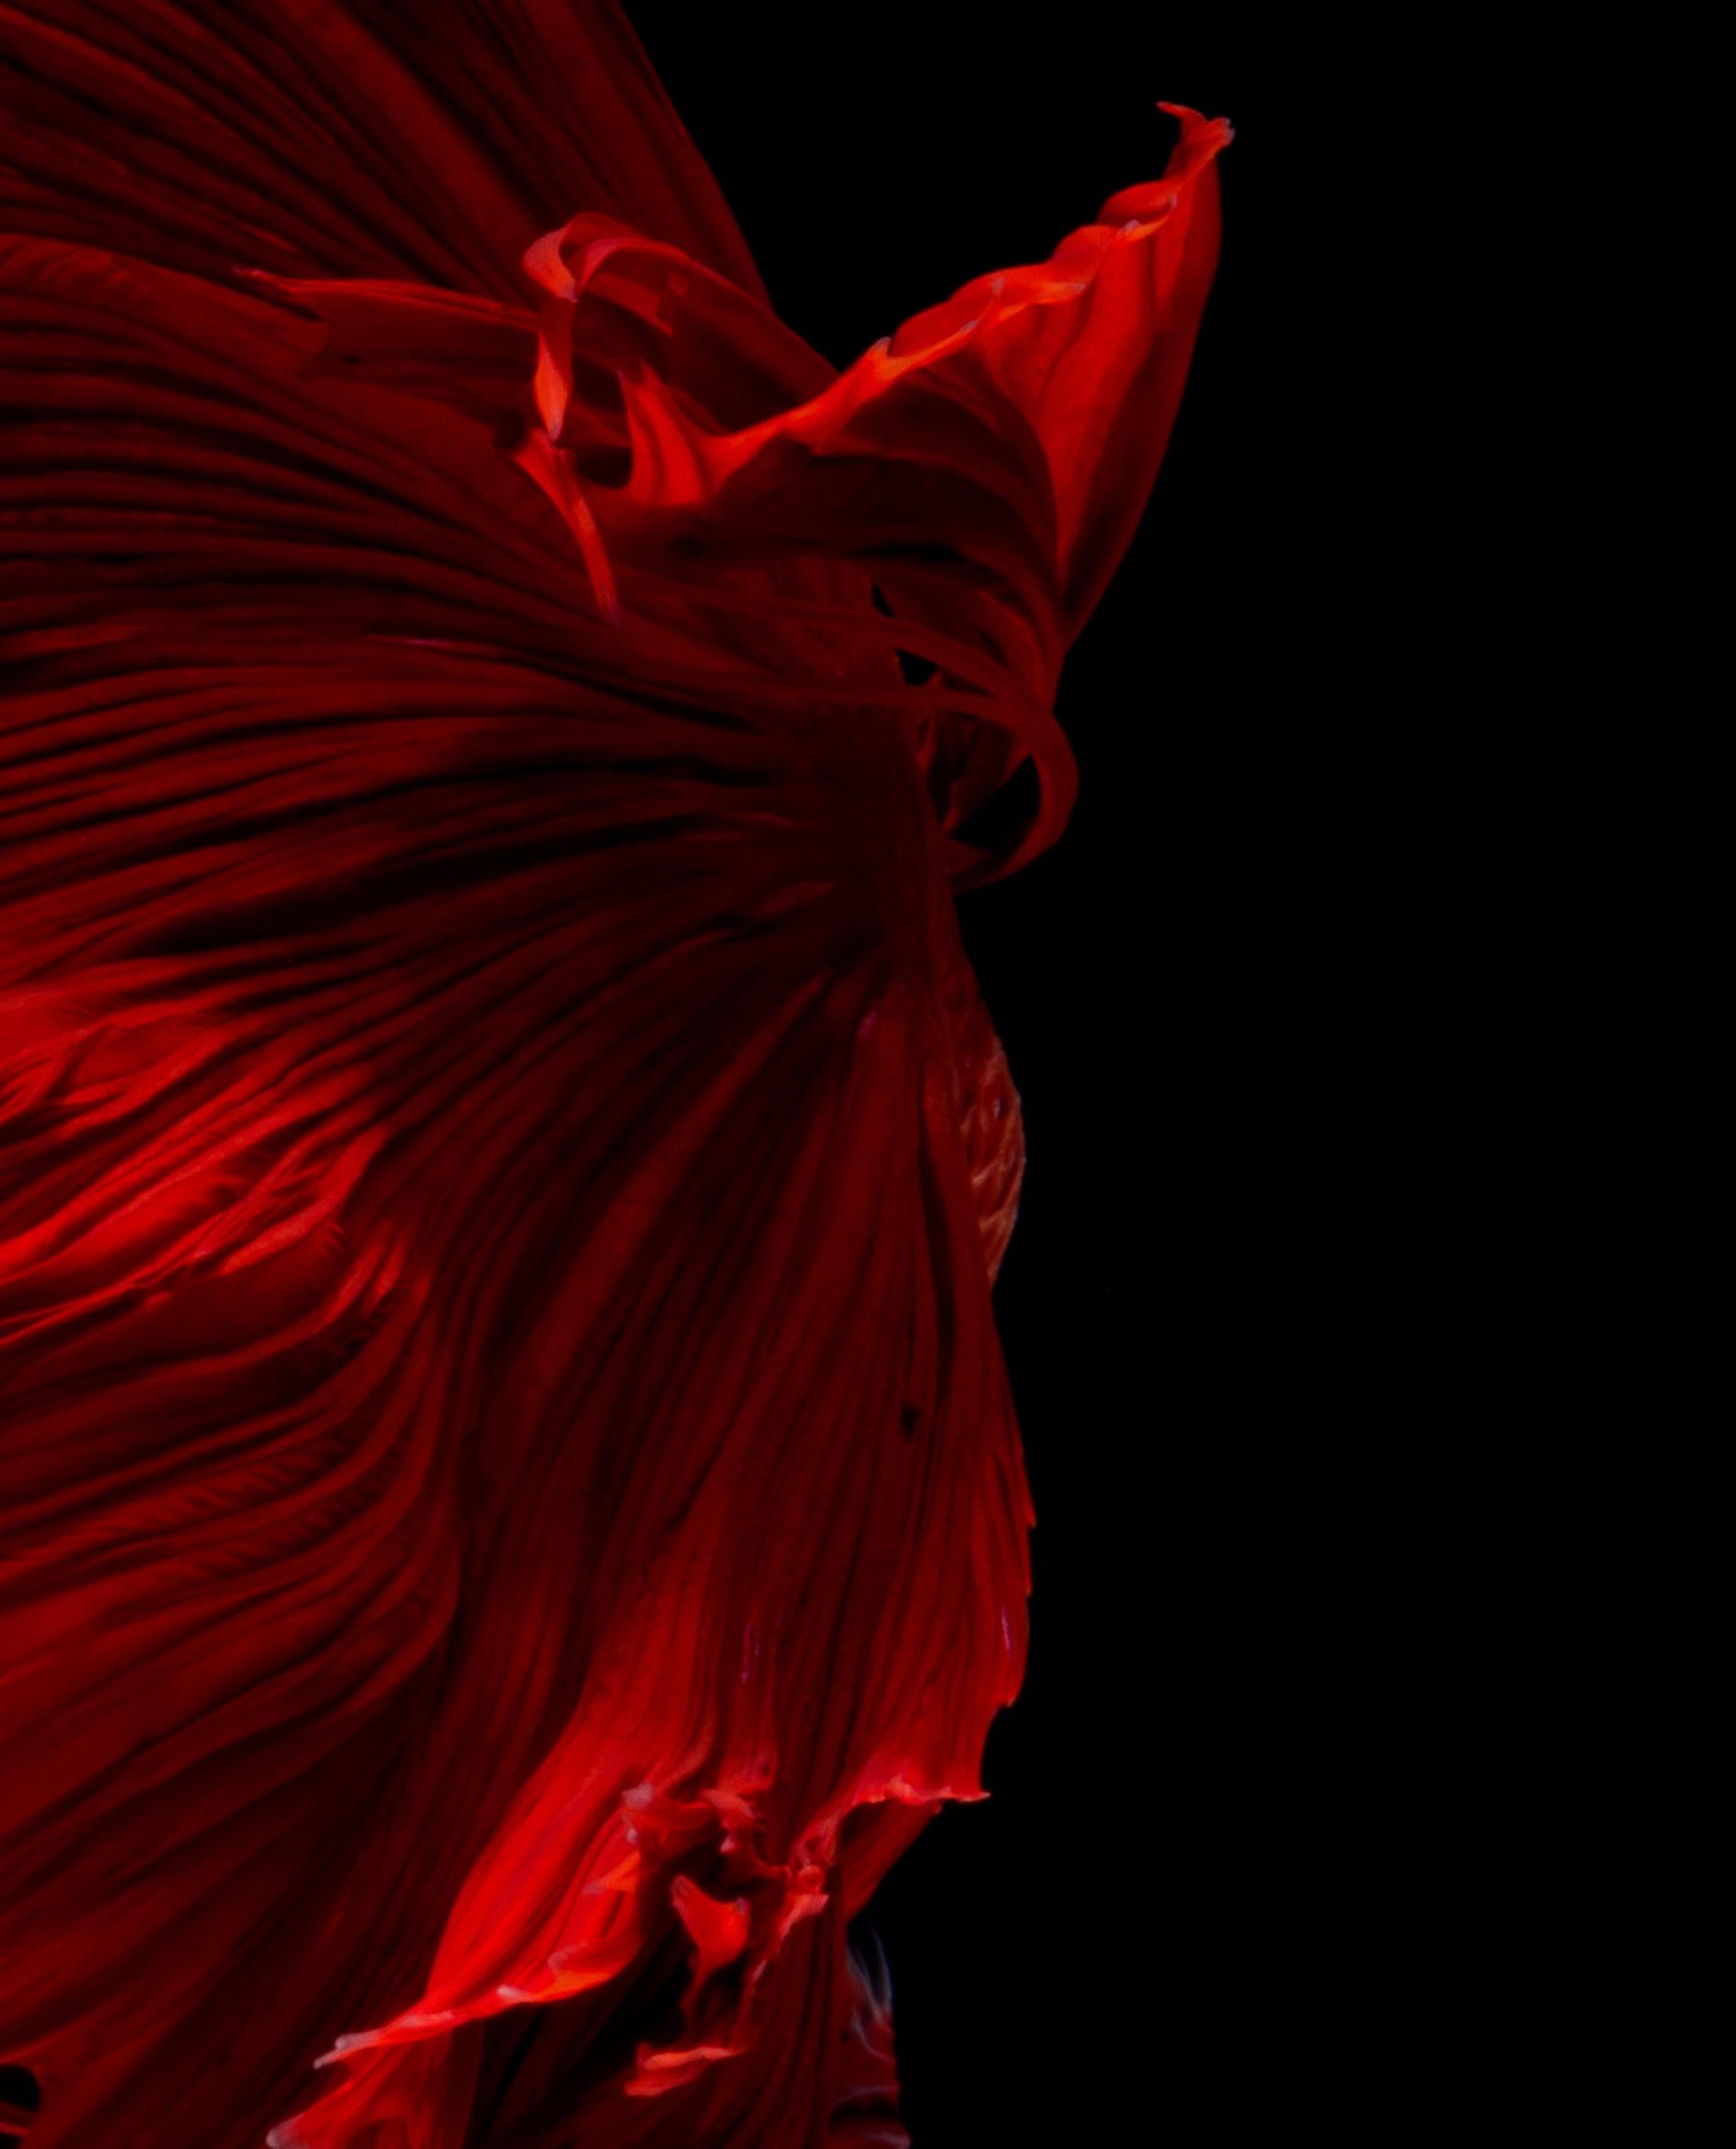 Africa is a photograph of bright red Siamese fighting fish on black background.  It is photography printed on glossy paper.  

The photograph comes in 2 sizes:
35.5